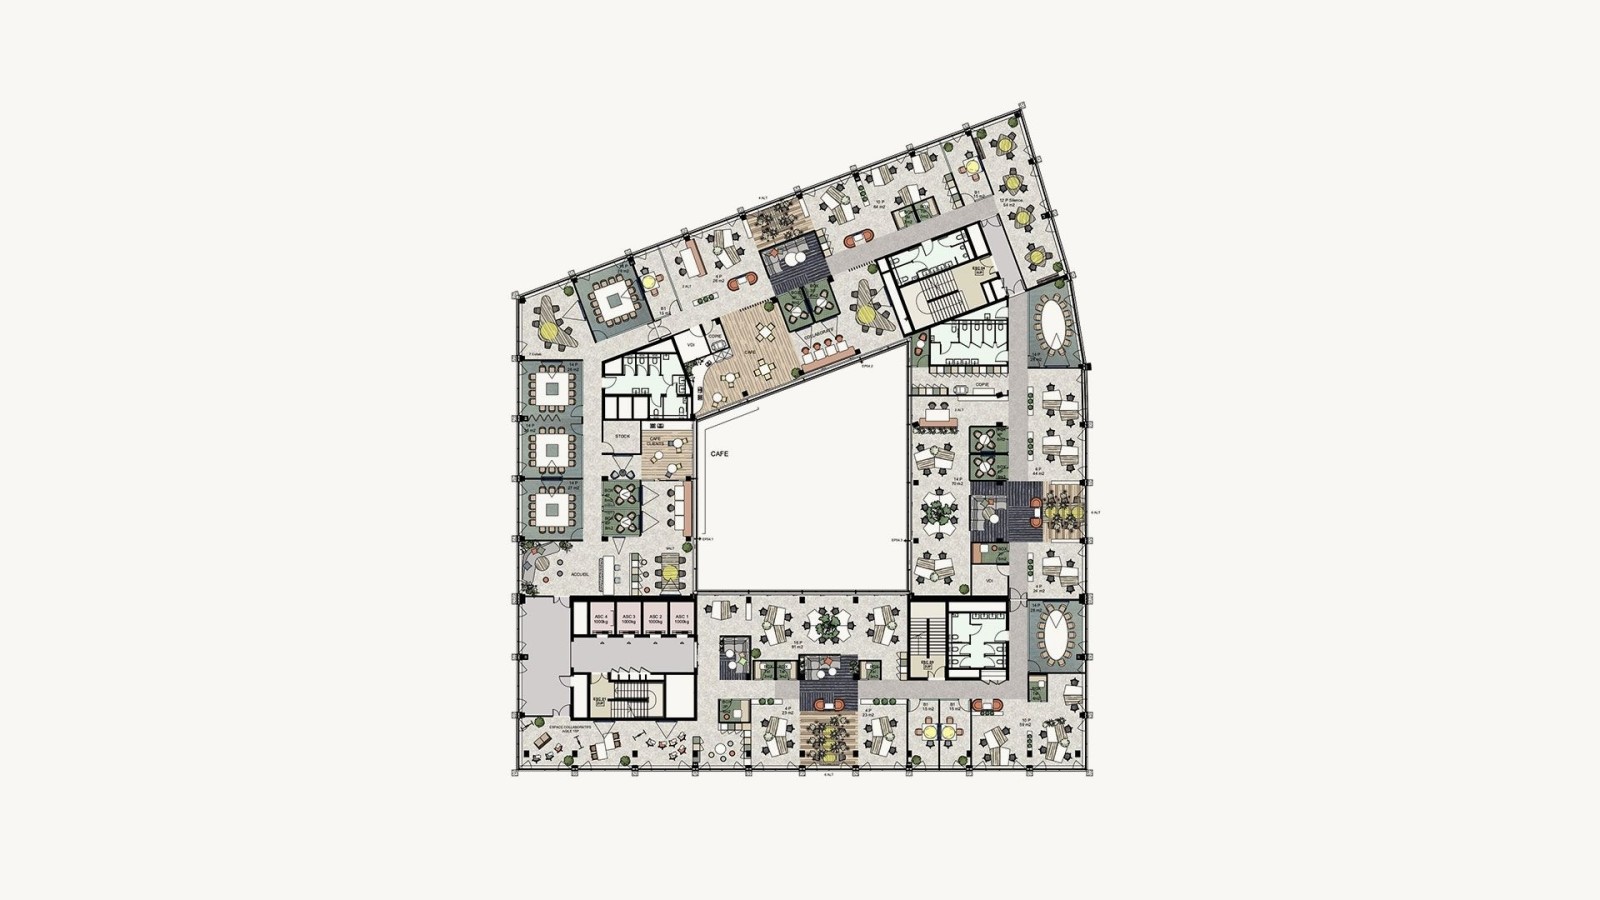 Messager - 2nd floor flex 60/40 open plan/partitioned space planning